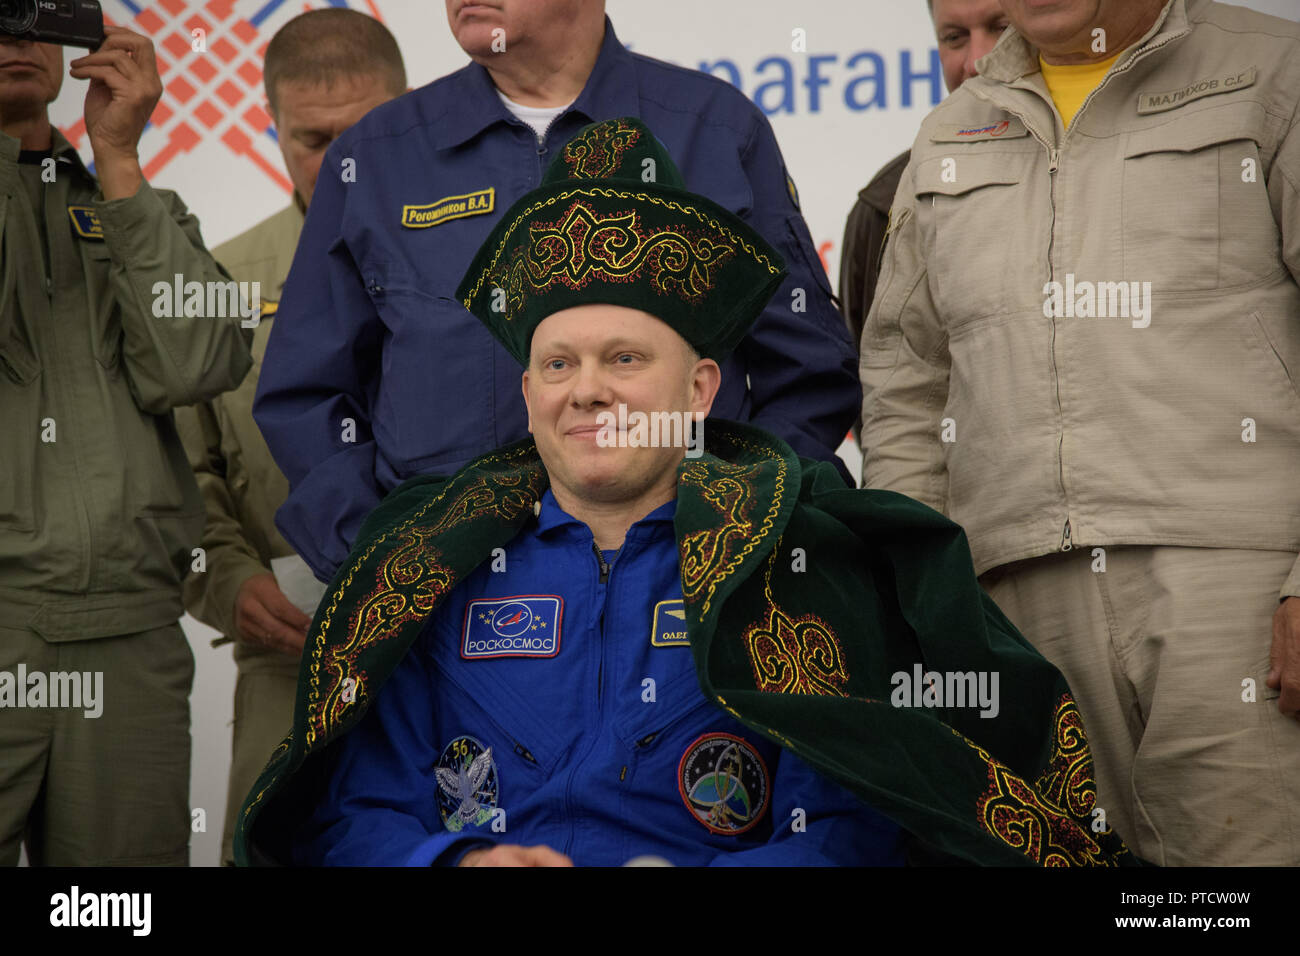 International Space Station Expedition 56 cosmonaut Oleg Artemyev rests dressed in traditional Kazakh clothing during the arrival ceremony at Karaganda Airport shortly after landing in the Russian Soyuz MS-08 spacecraft October 4, 2018 in Zhezkazgan, Kazakhstan. Stock Photo